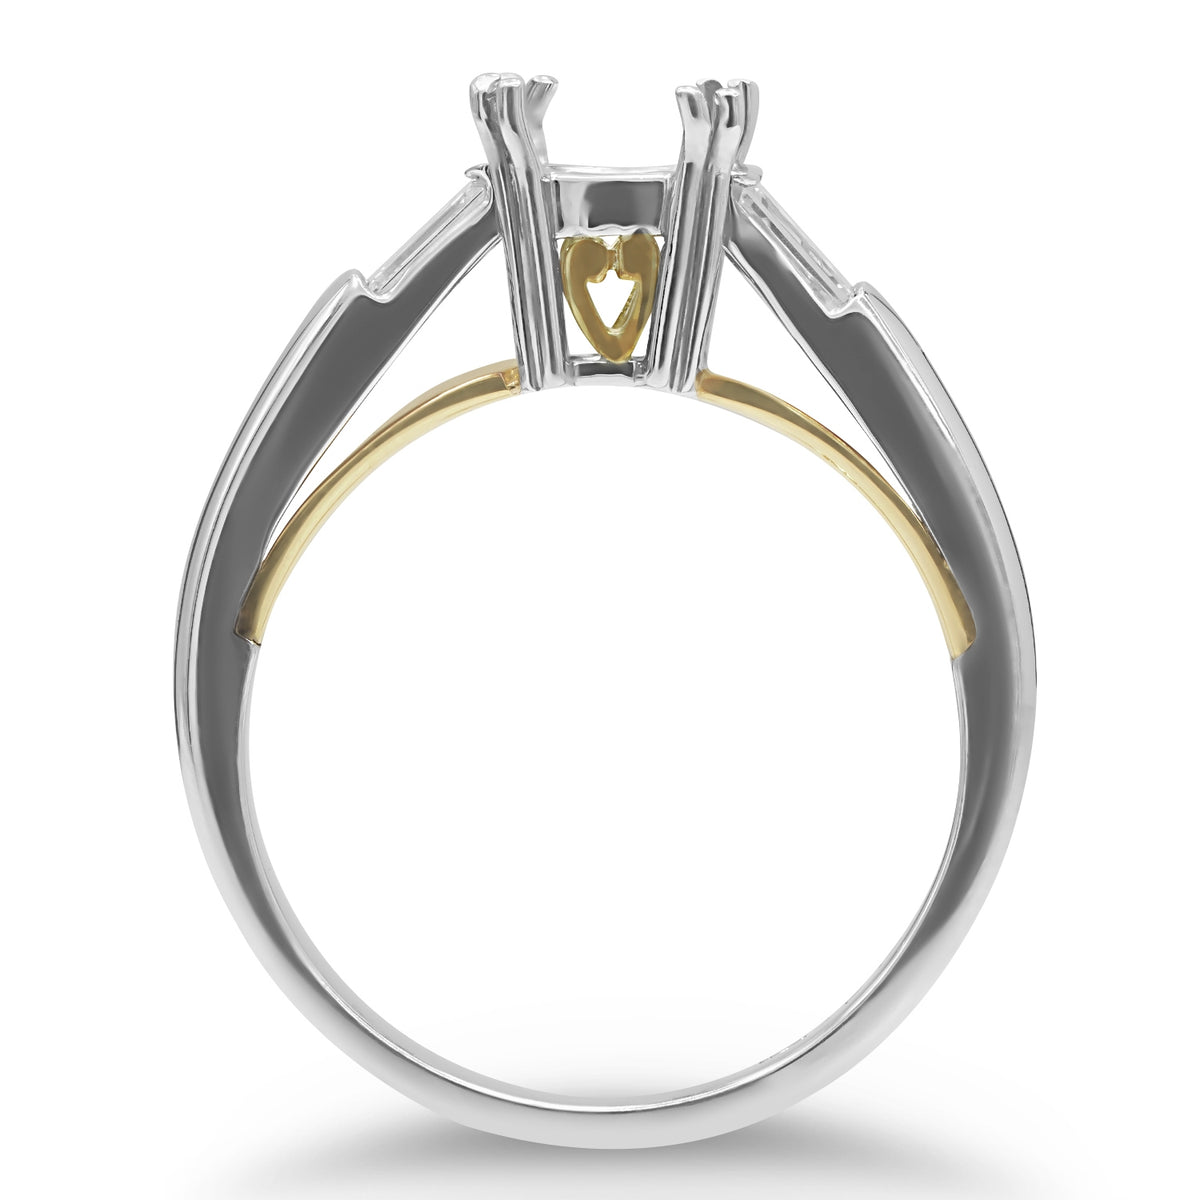 Platinum and Yellow Gold Semi-Mount Ring